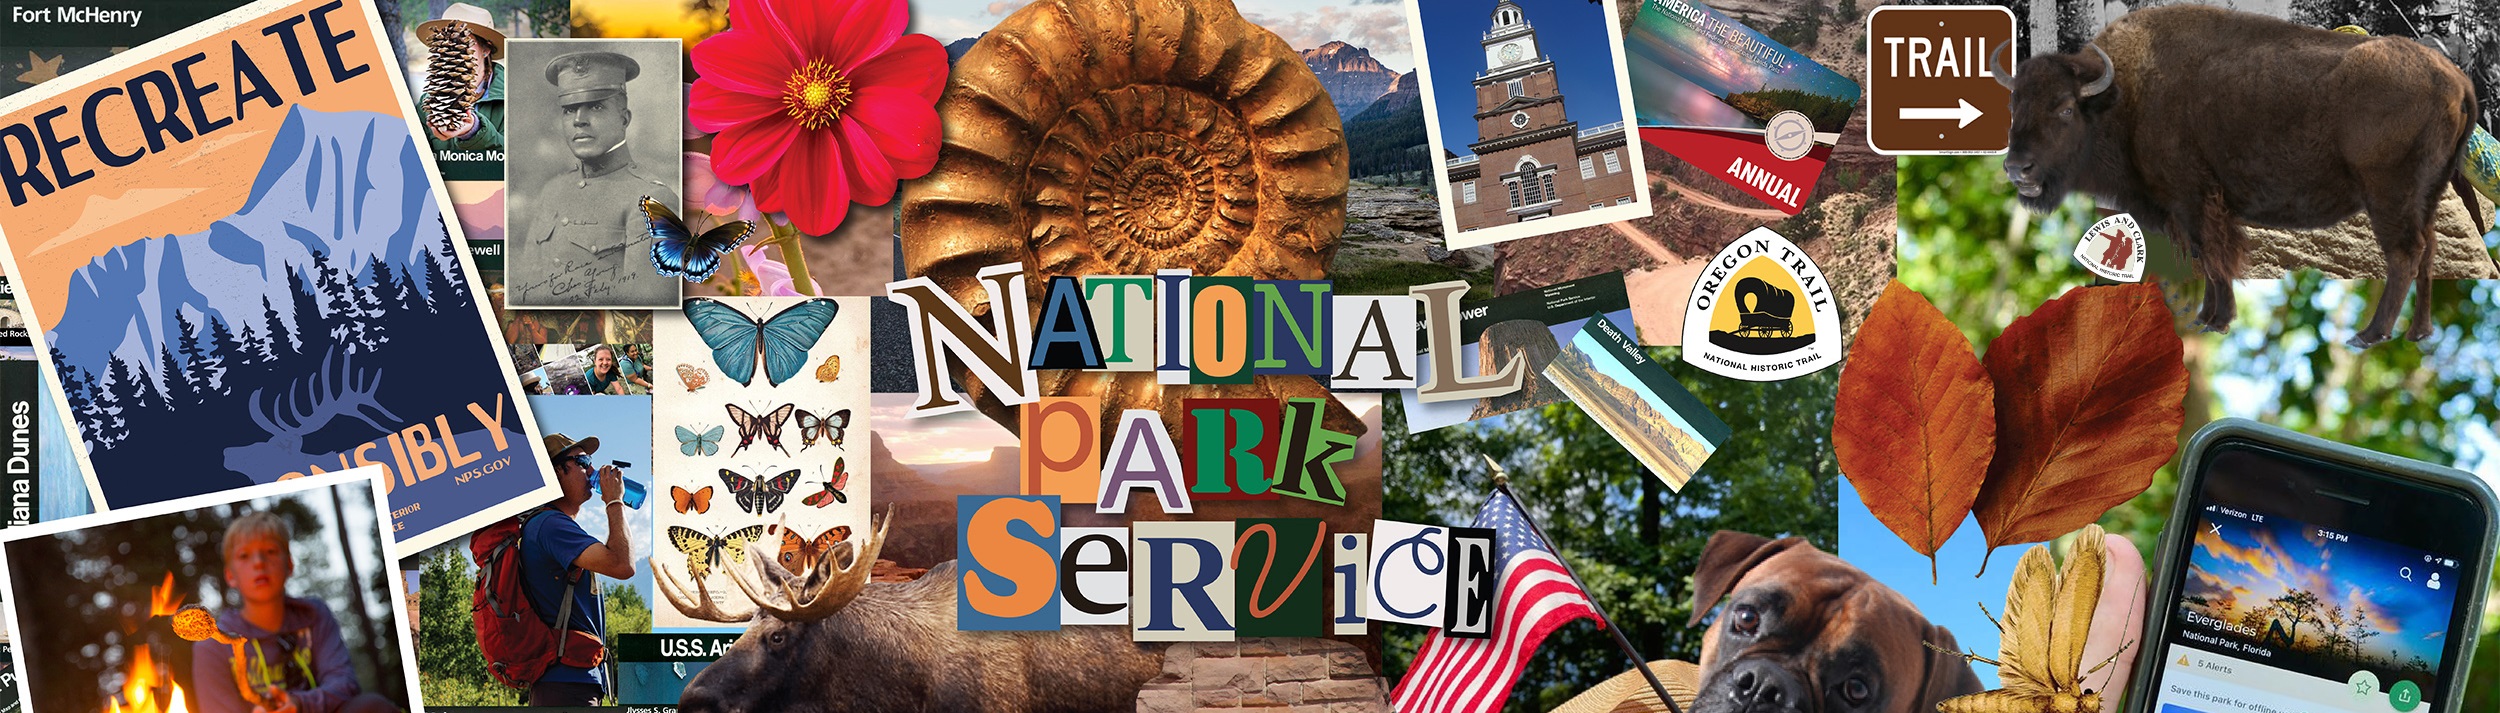 Collage of park-related images with text reading "National Park Service"